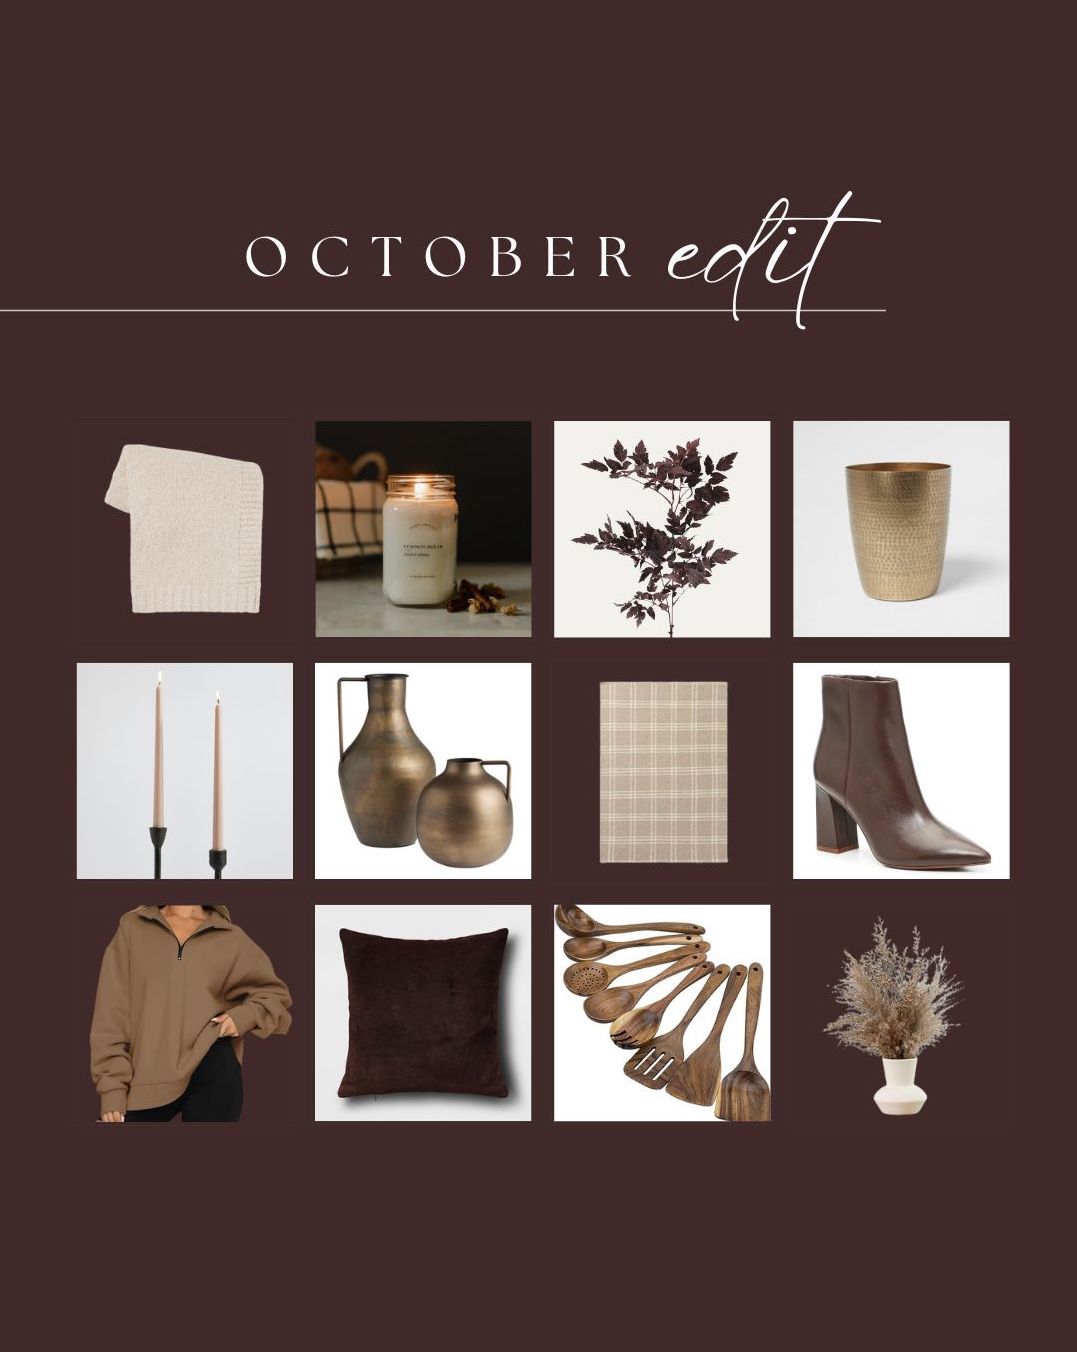 The Best of October: a curated collection of fashion, decor, and more to dress yourself and your home for the season